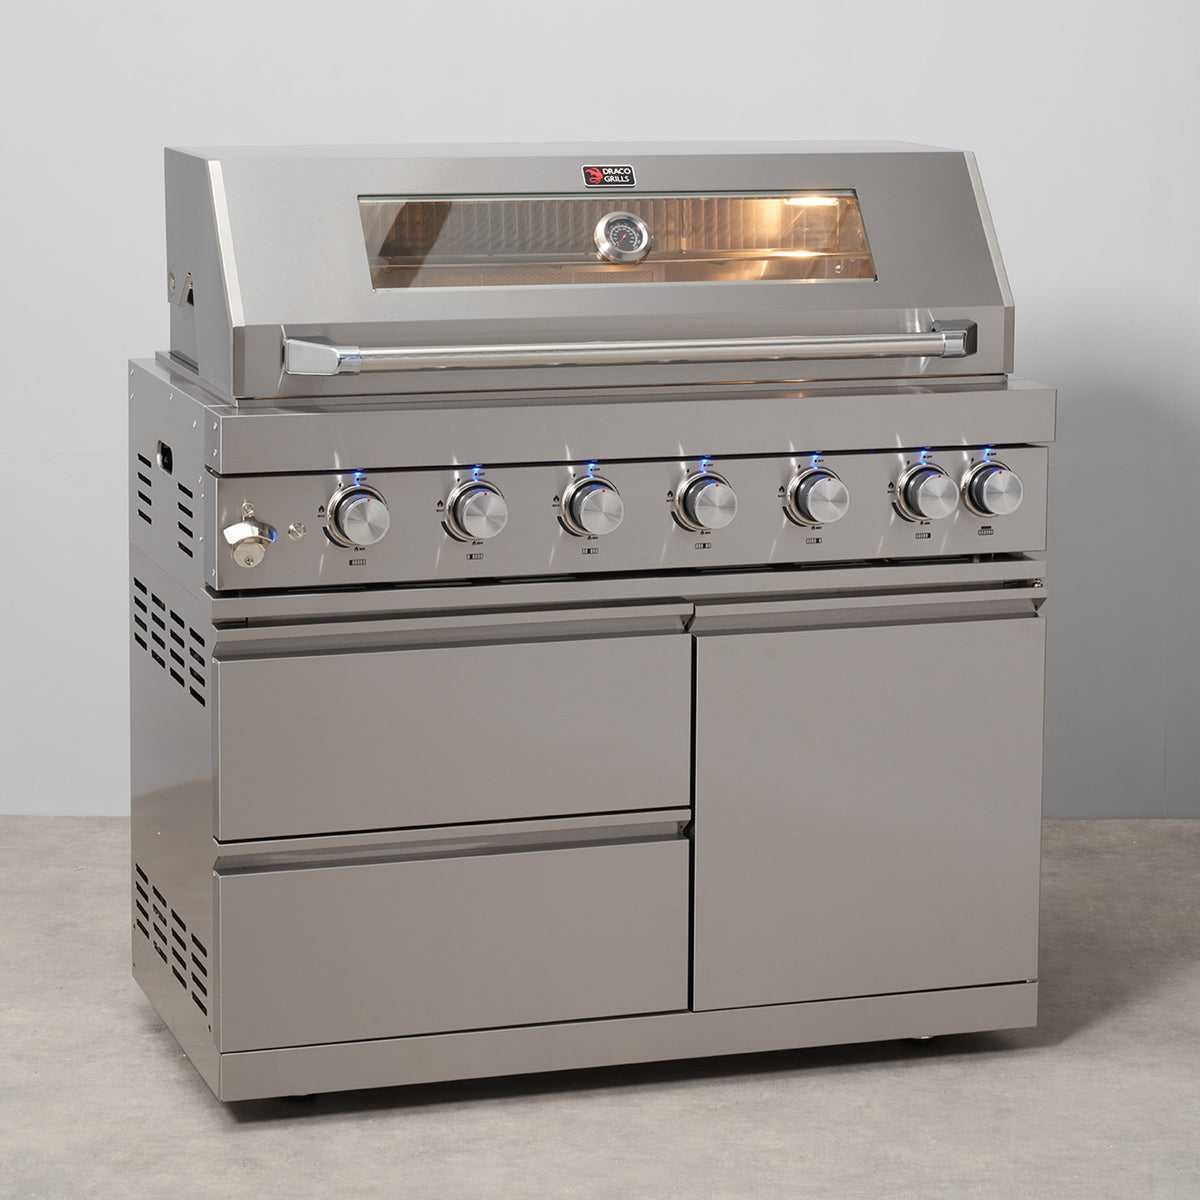 Draco Grills 6 Burner BBQ Modular Outdoor Kitchen with Sear Station, Double Fridge and Sink